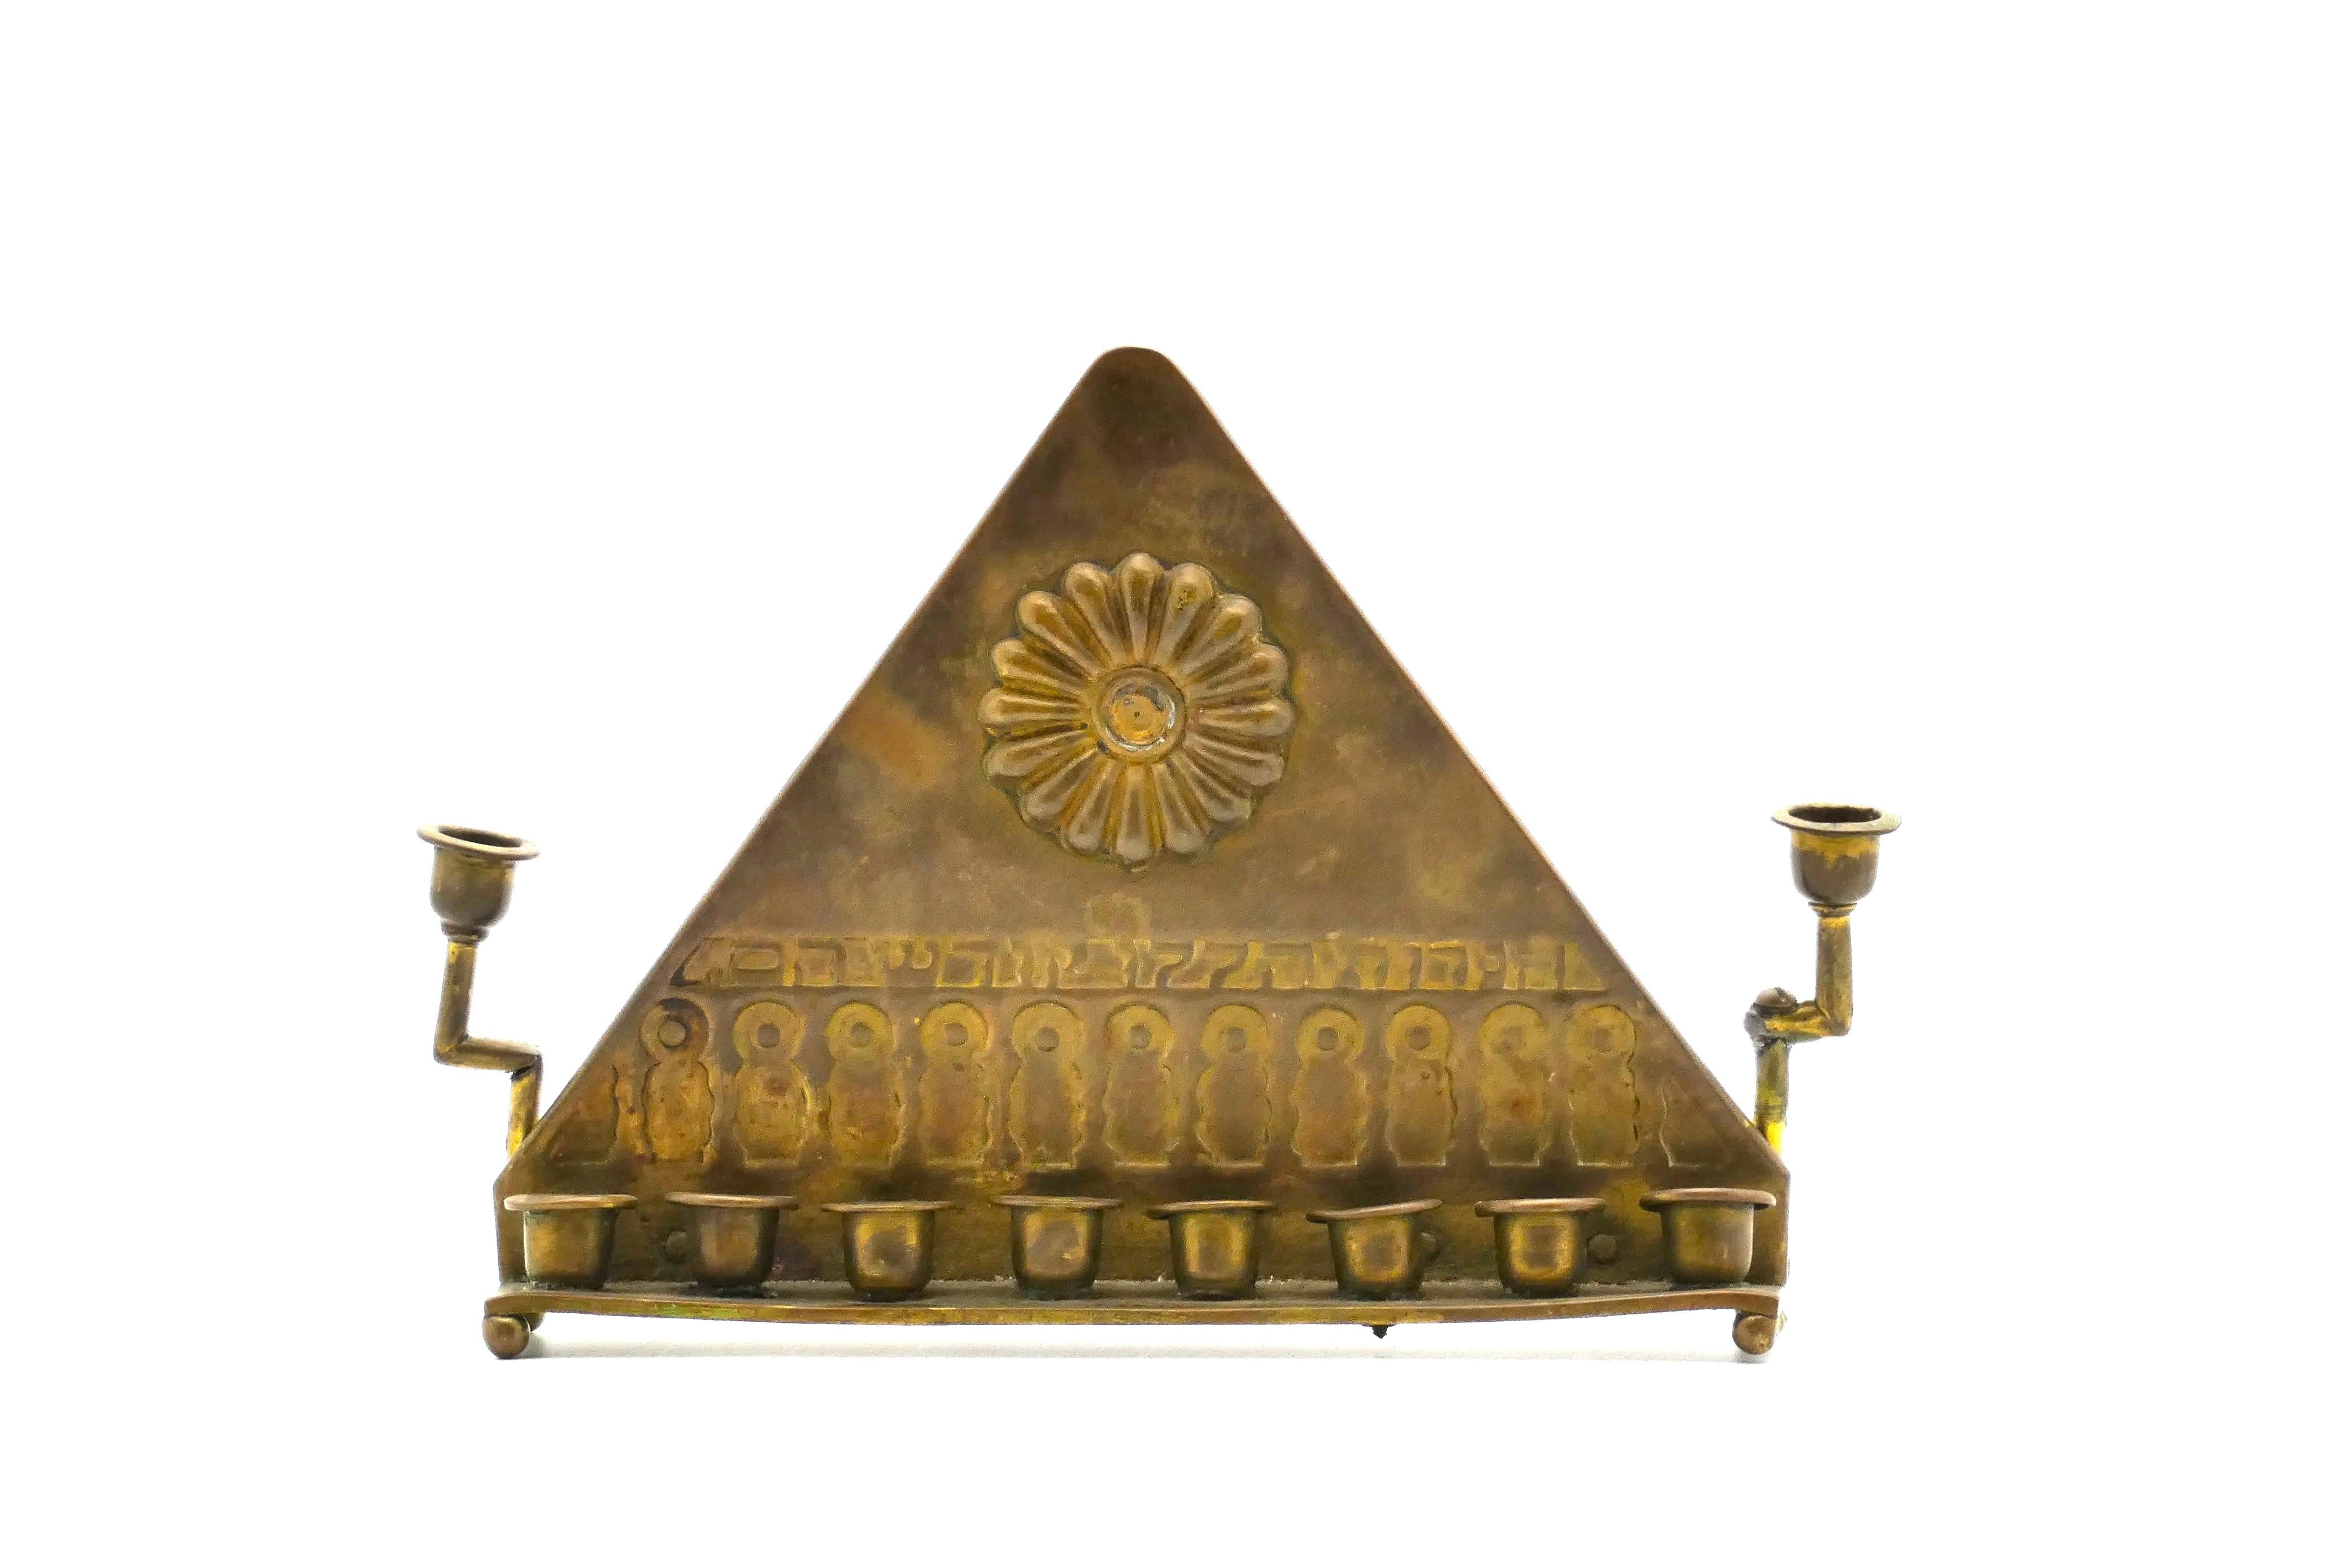 This Bezalel Hanukkah lamp is elegantly decorated with a prominent rosette on its triangular backplate.

On the lower half of the backplate are numerous notched archways placed under the similarly indented inscription in Hebrew which translates to